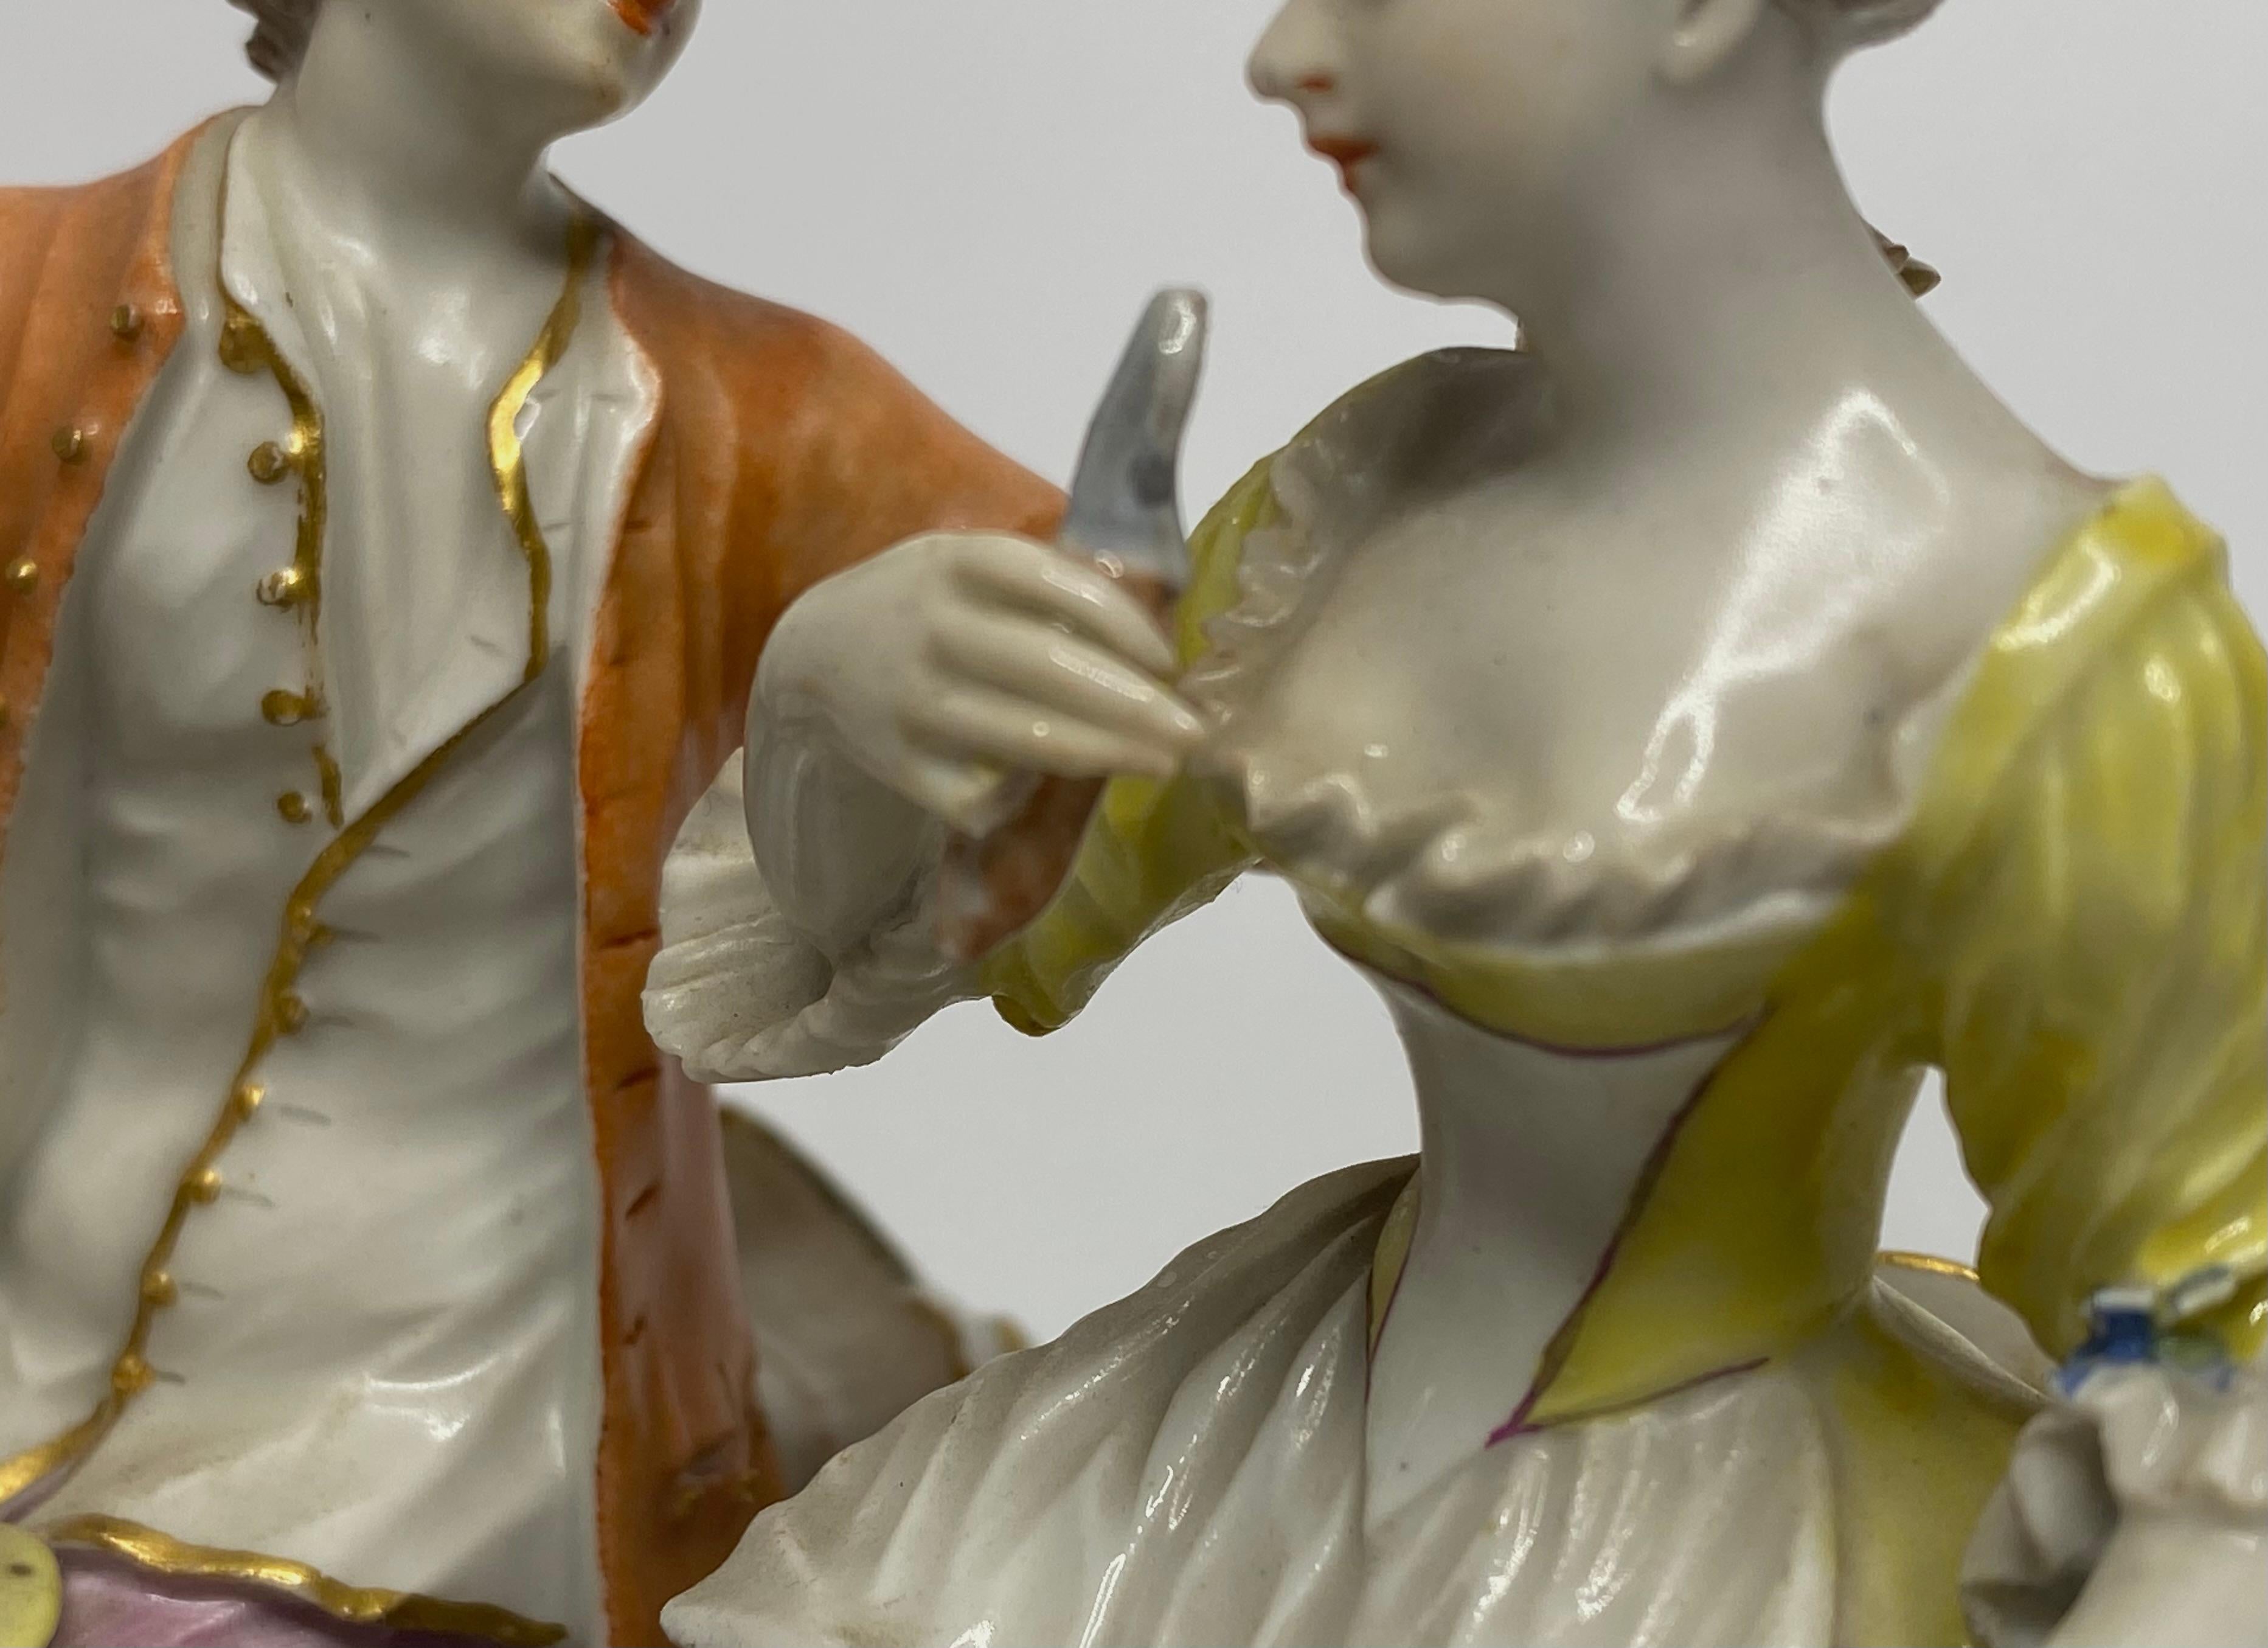 Late 18th Century Ludwigsburg porcelain group, J.C. Haselmeyer, c. 1770. For Sale